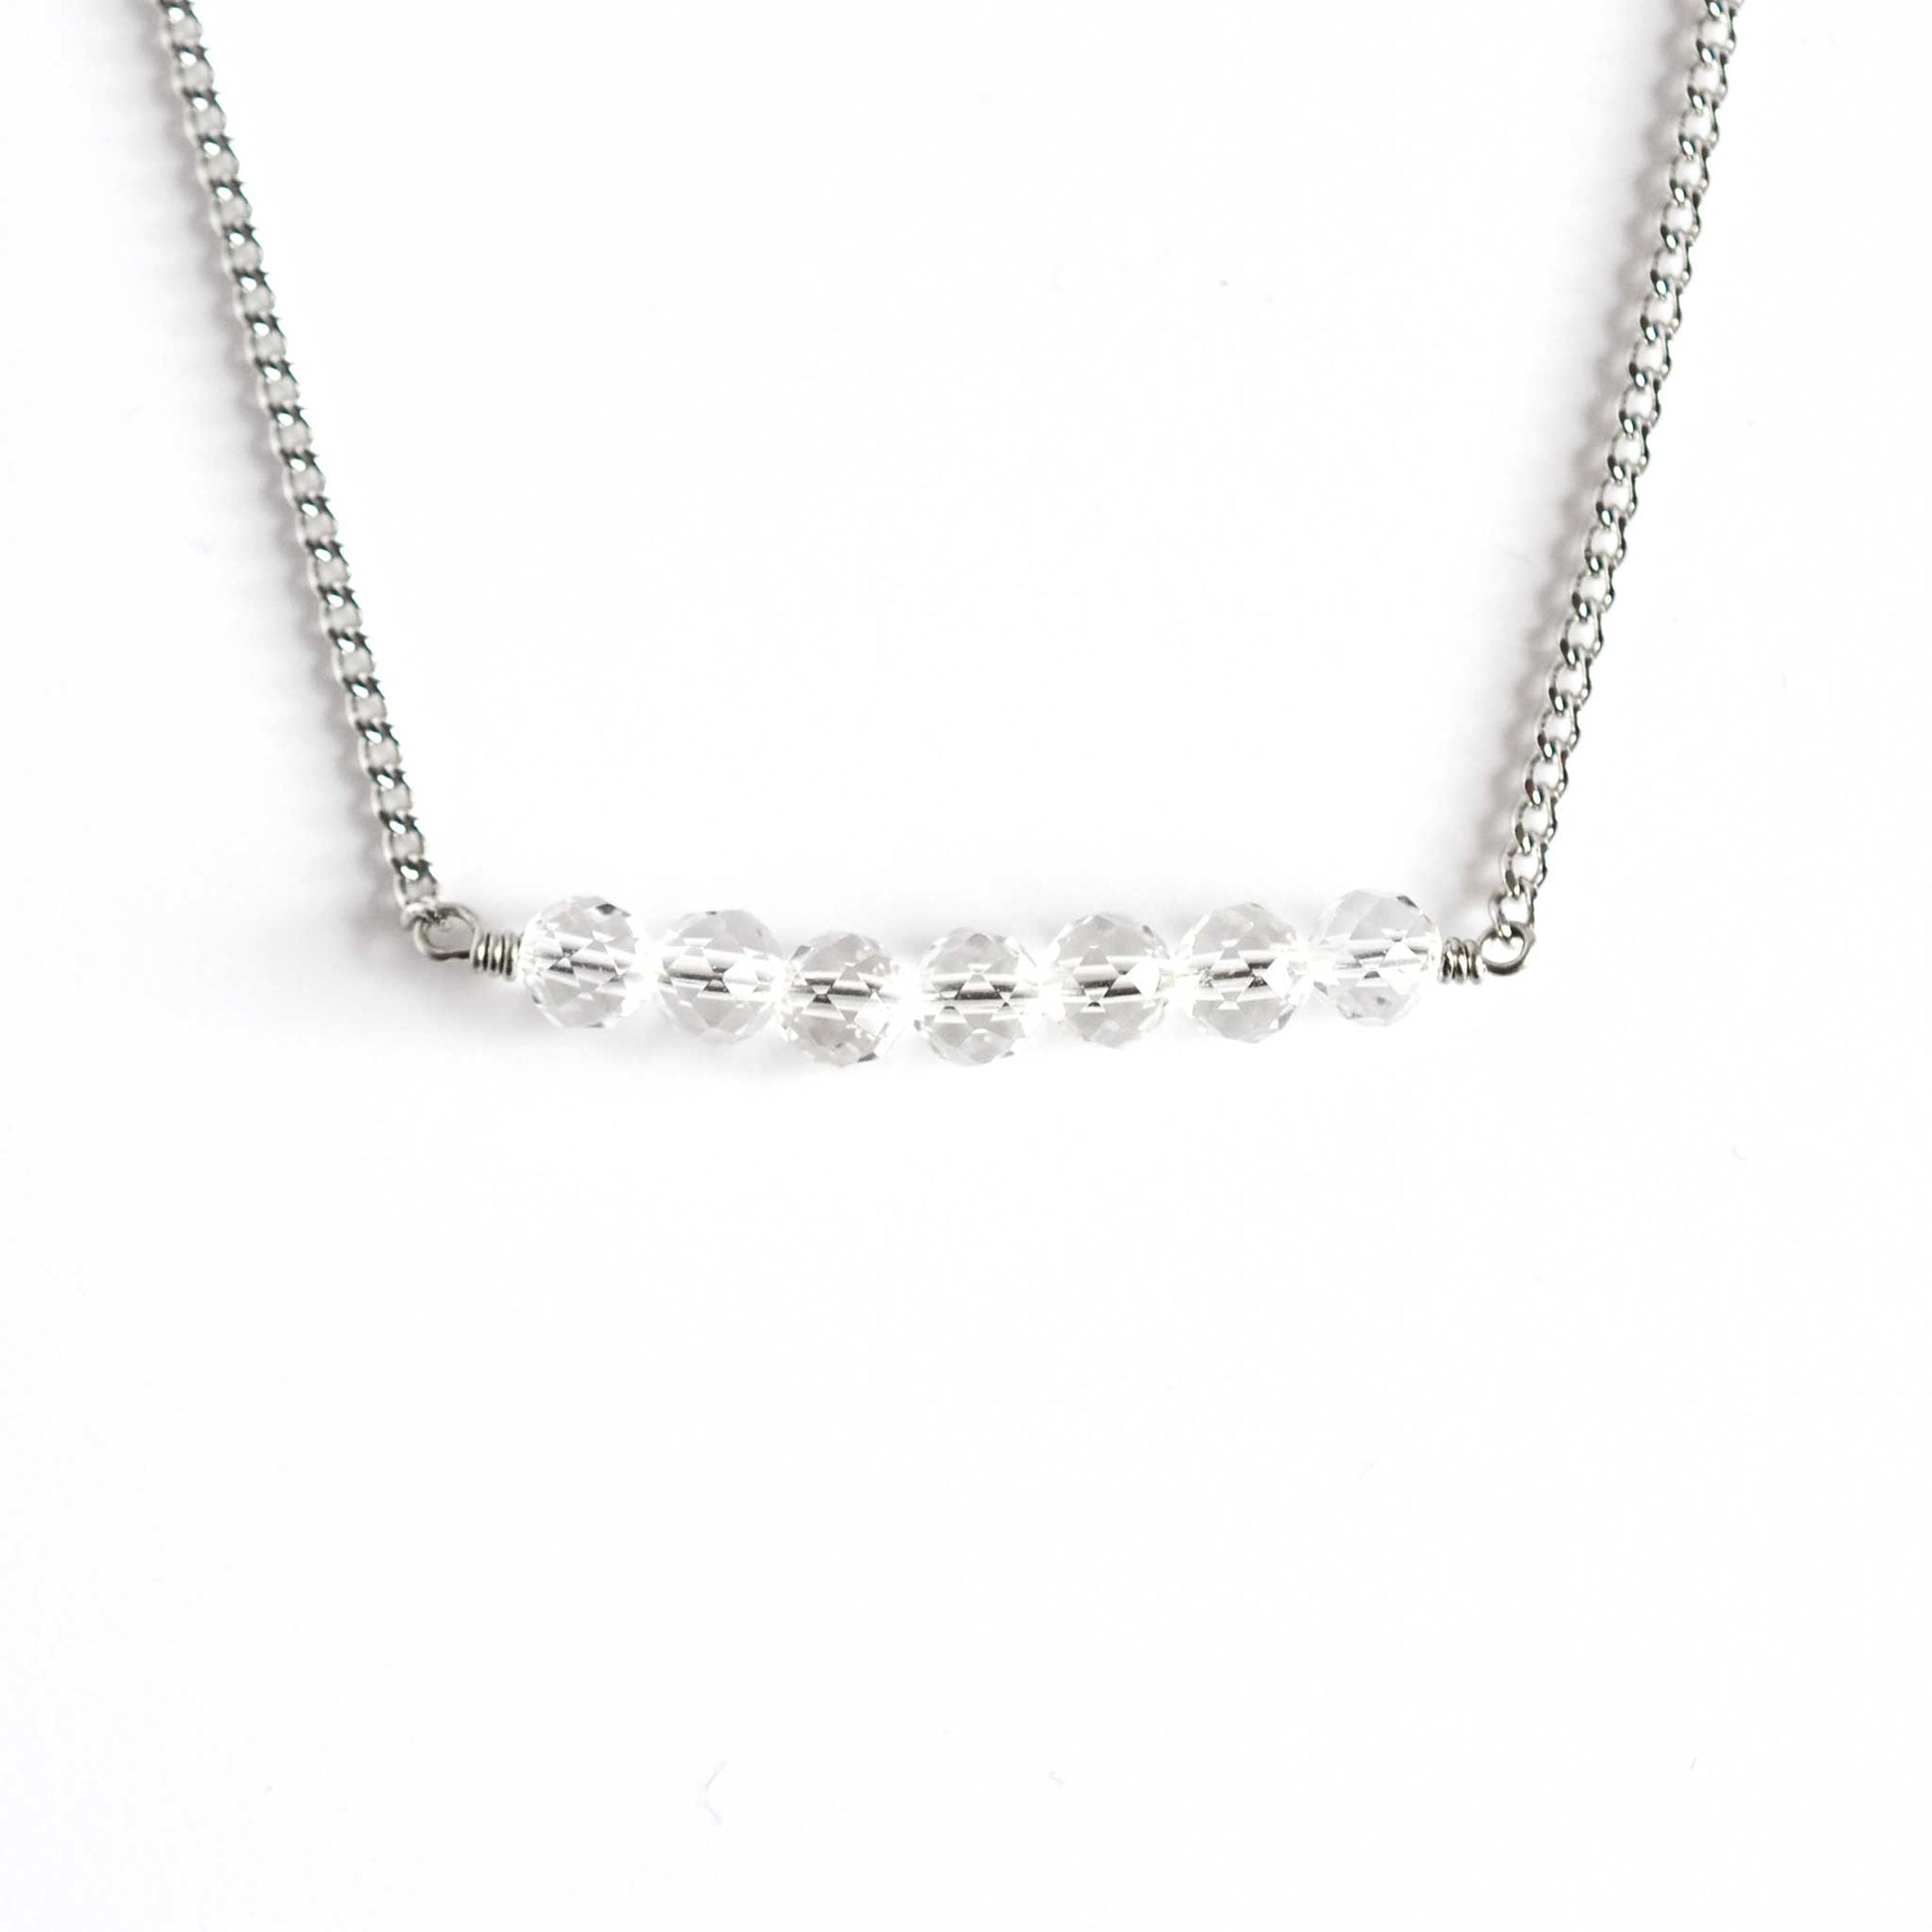 Clear crystal necklace with stainless steel chain on white background